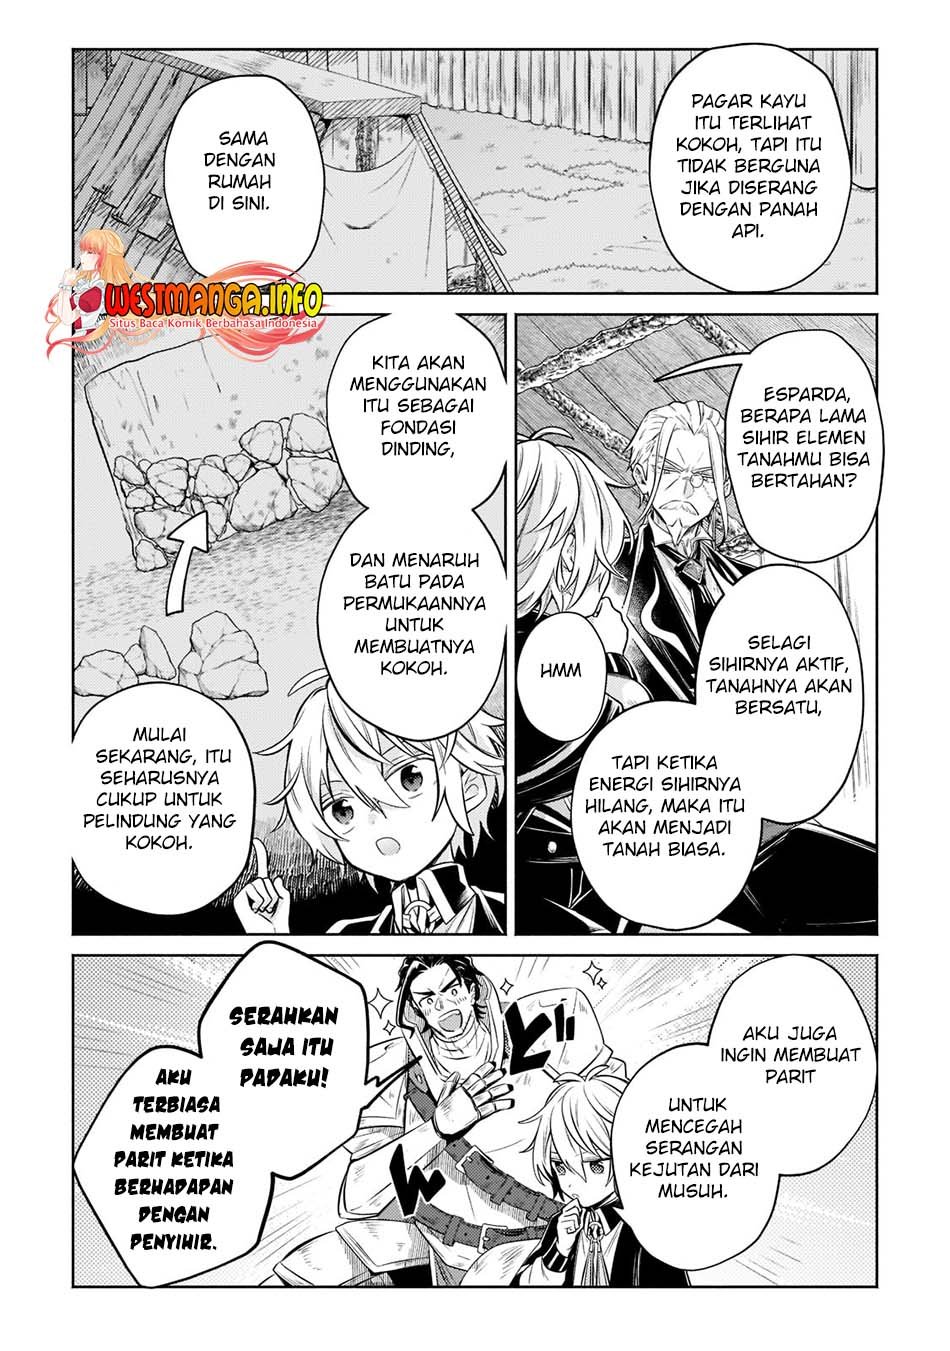 Fun Territory Defense Of The Easy-Going Lord ~The Nameless Village Is Made Into The Strongest Fortified City By Production Magic~ Chapter 07 - 201